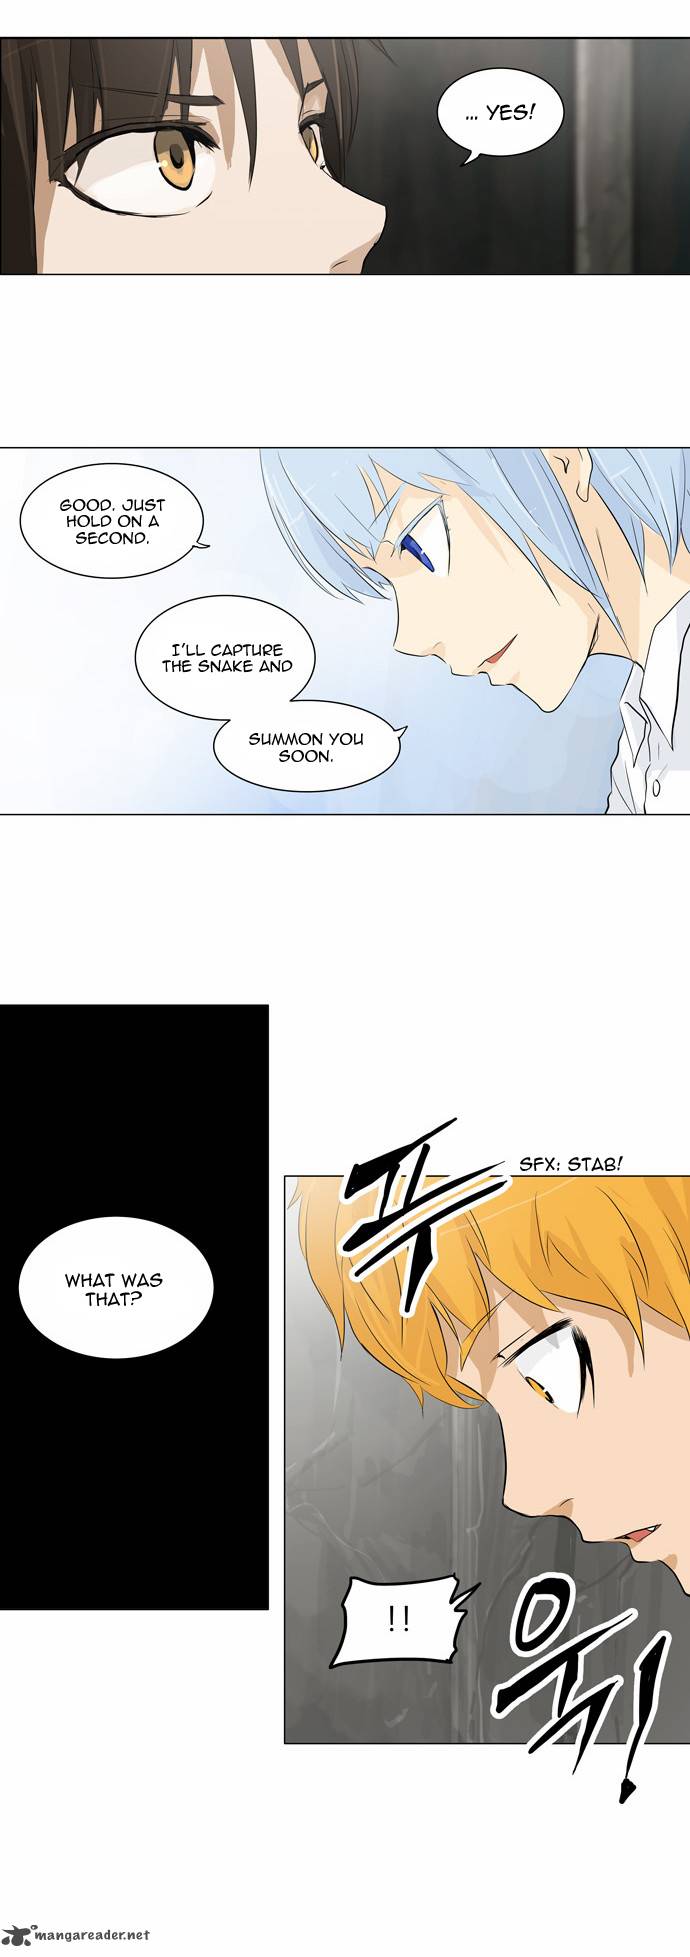 Tower Of God 172 26